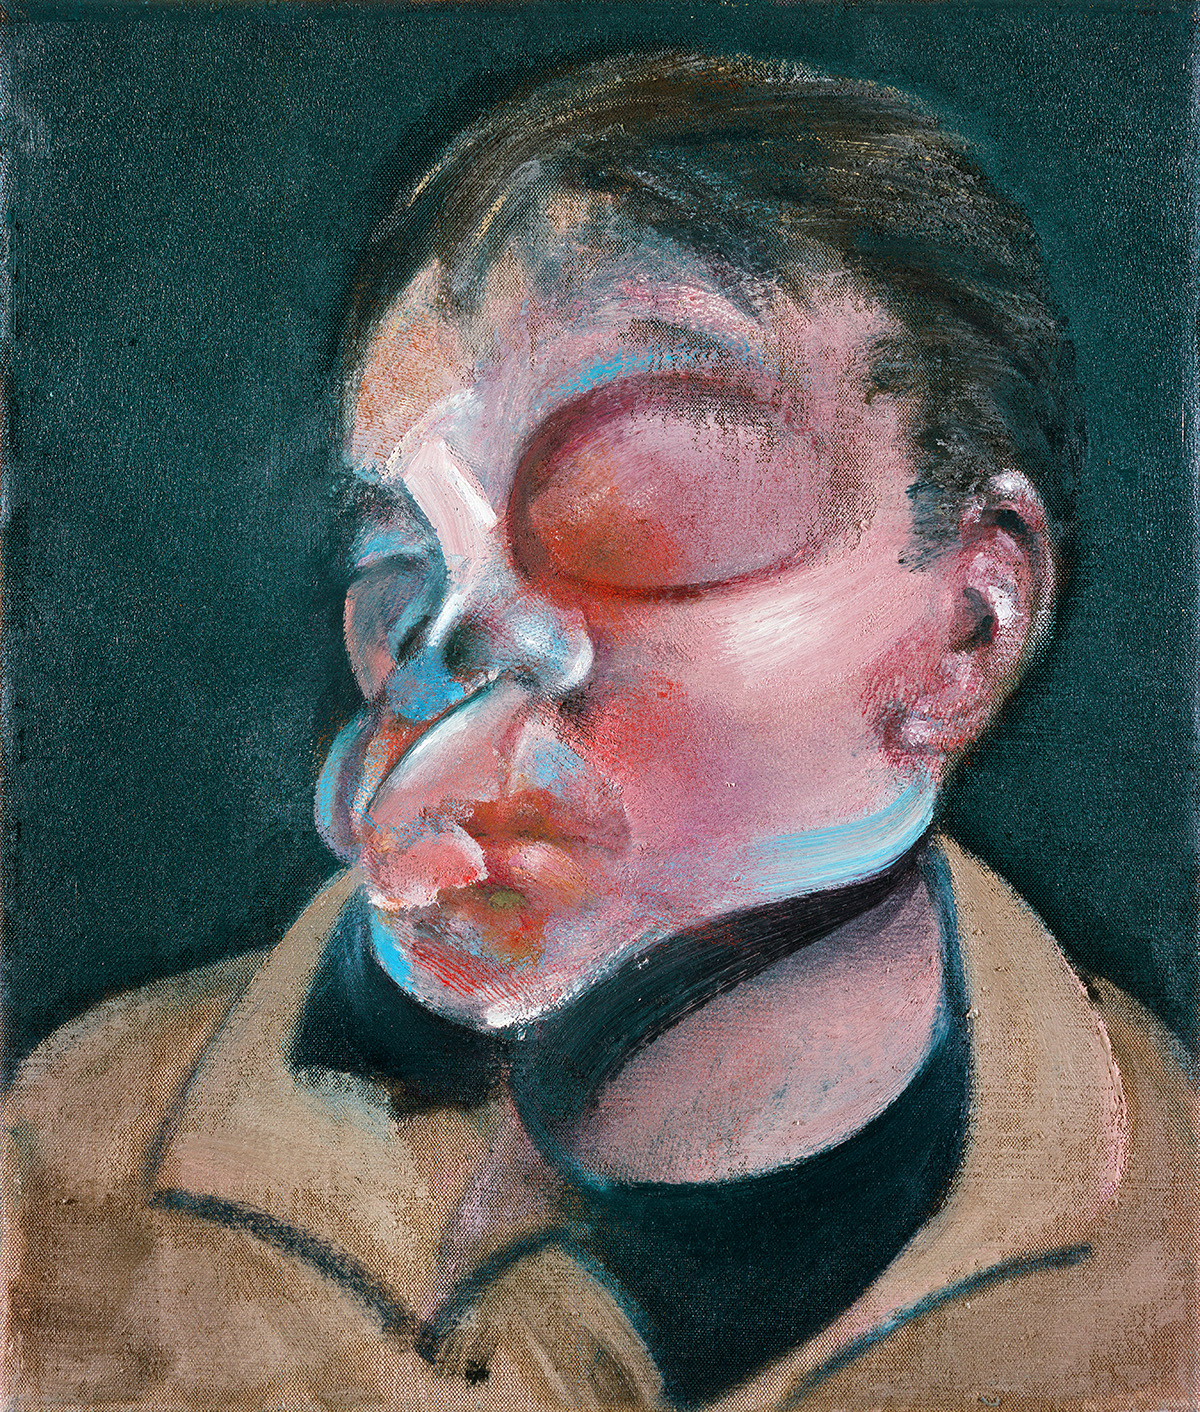 Francis Bacon, Self- Portrait with Injured Eye, 1972. Oil on canvas.  CR no 72-02. © The Estate of Francis Bacon/ DACS London 2019. All rights reserved.